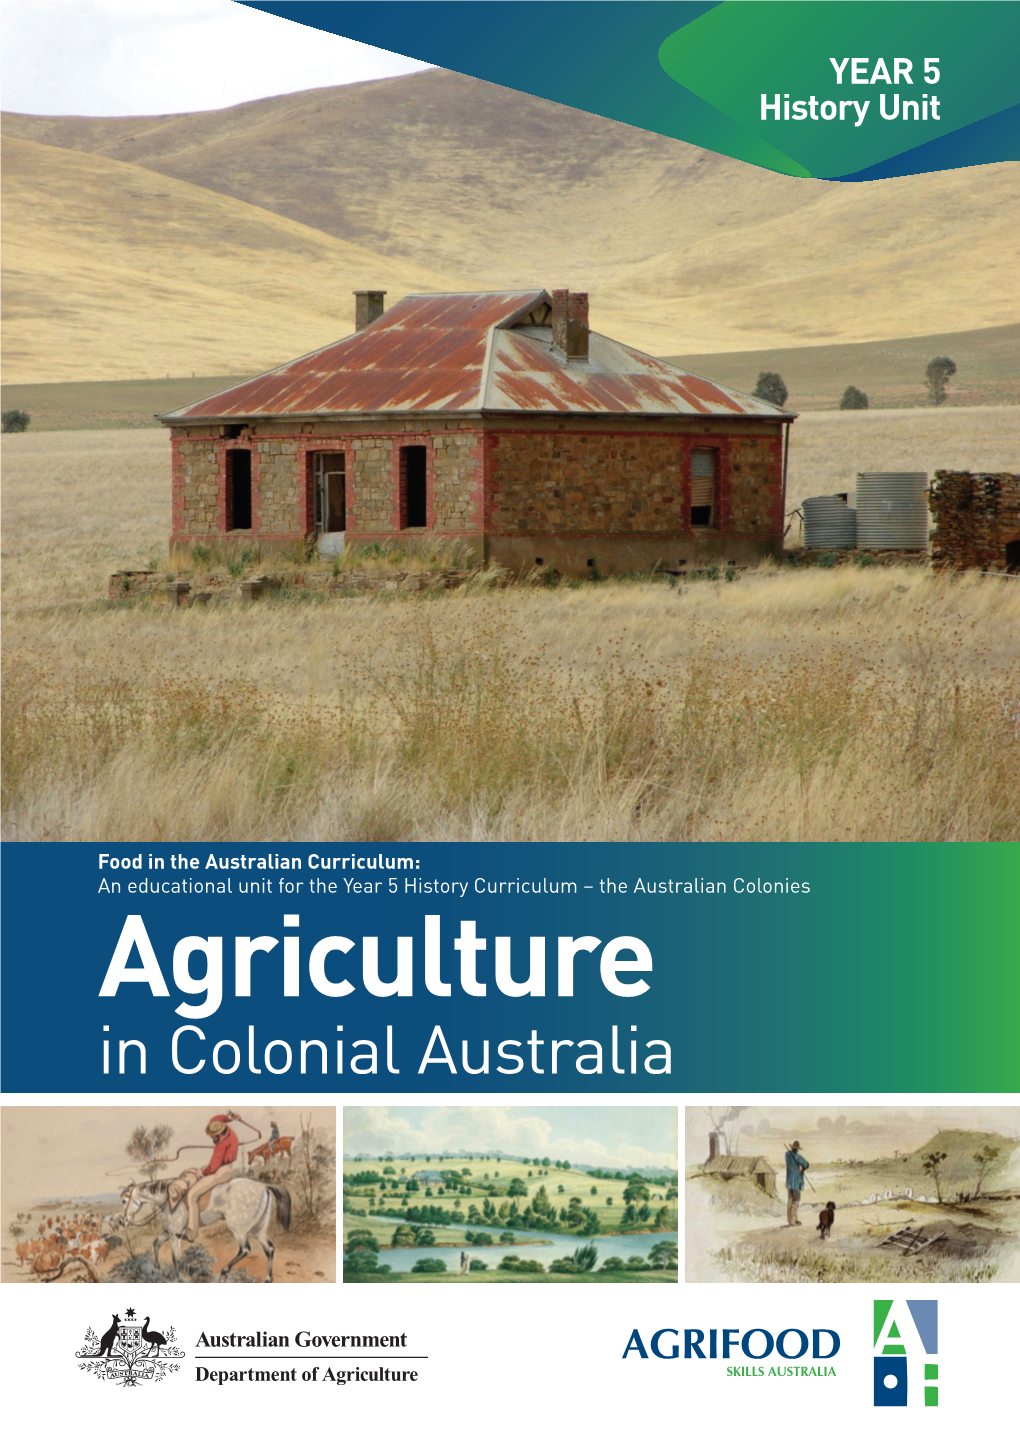 Agriculture in Colonial Australia